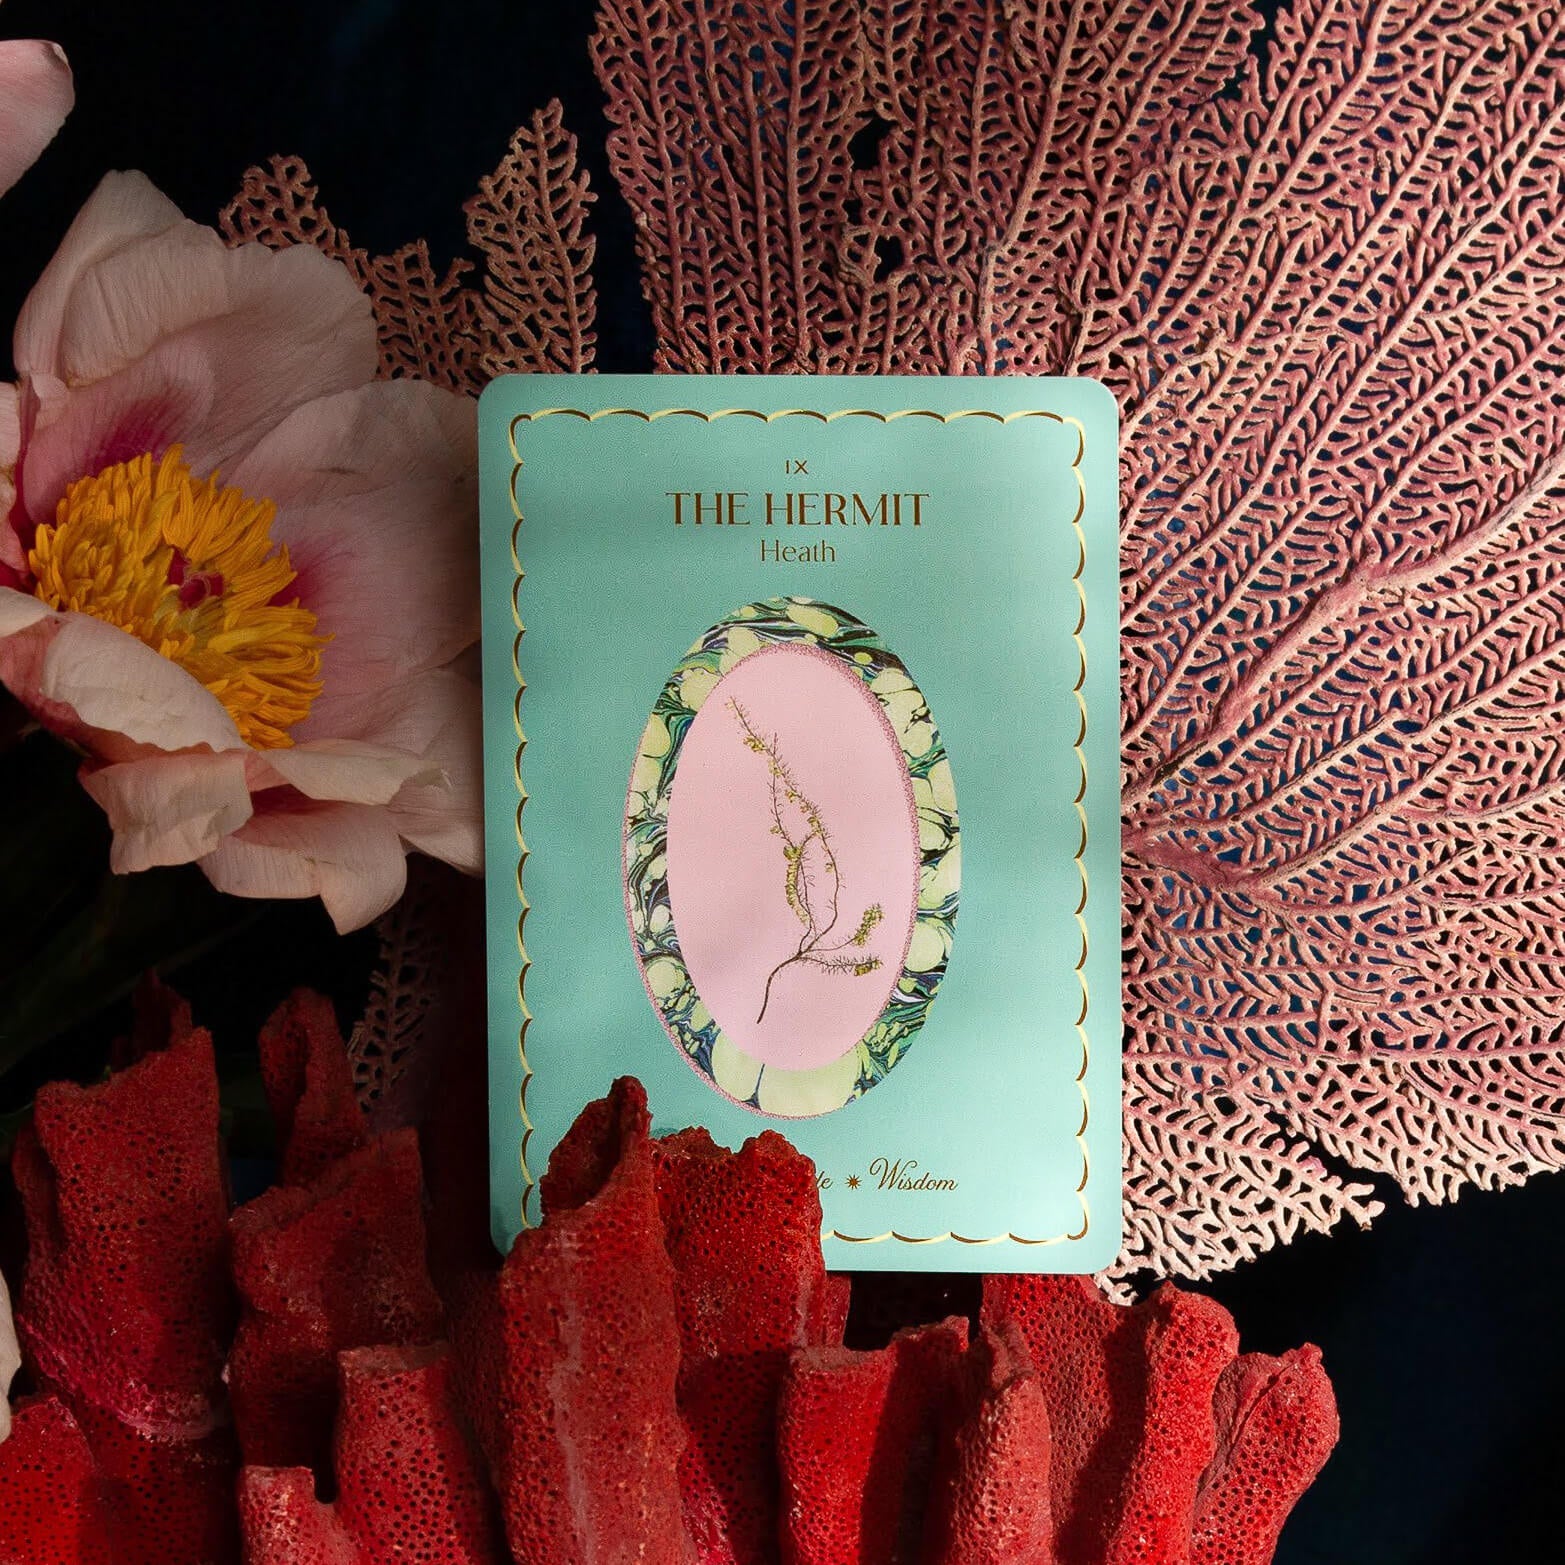 The Garden Journey Deck's Hermit card, moodily lit, nestled among beautiful corals and flowers.